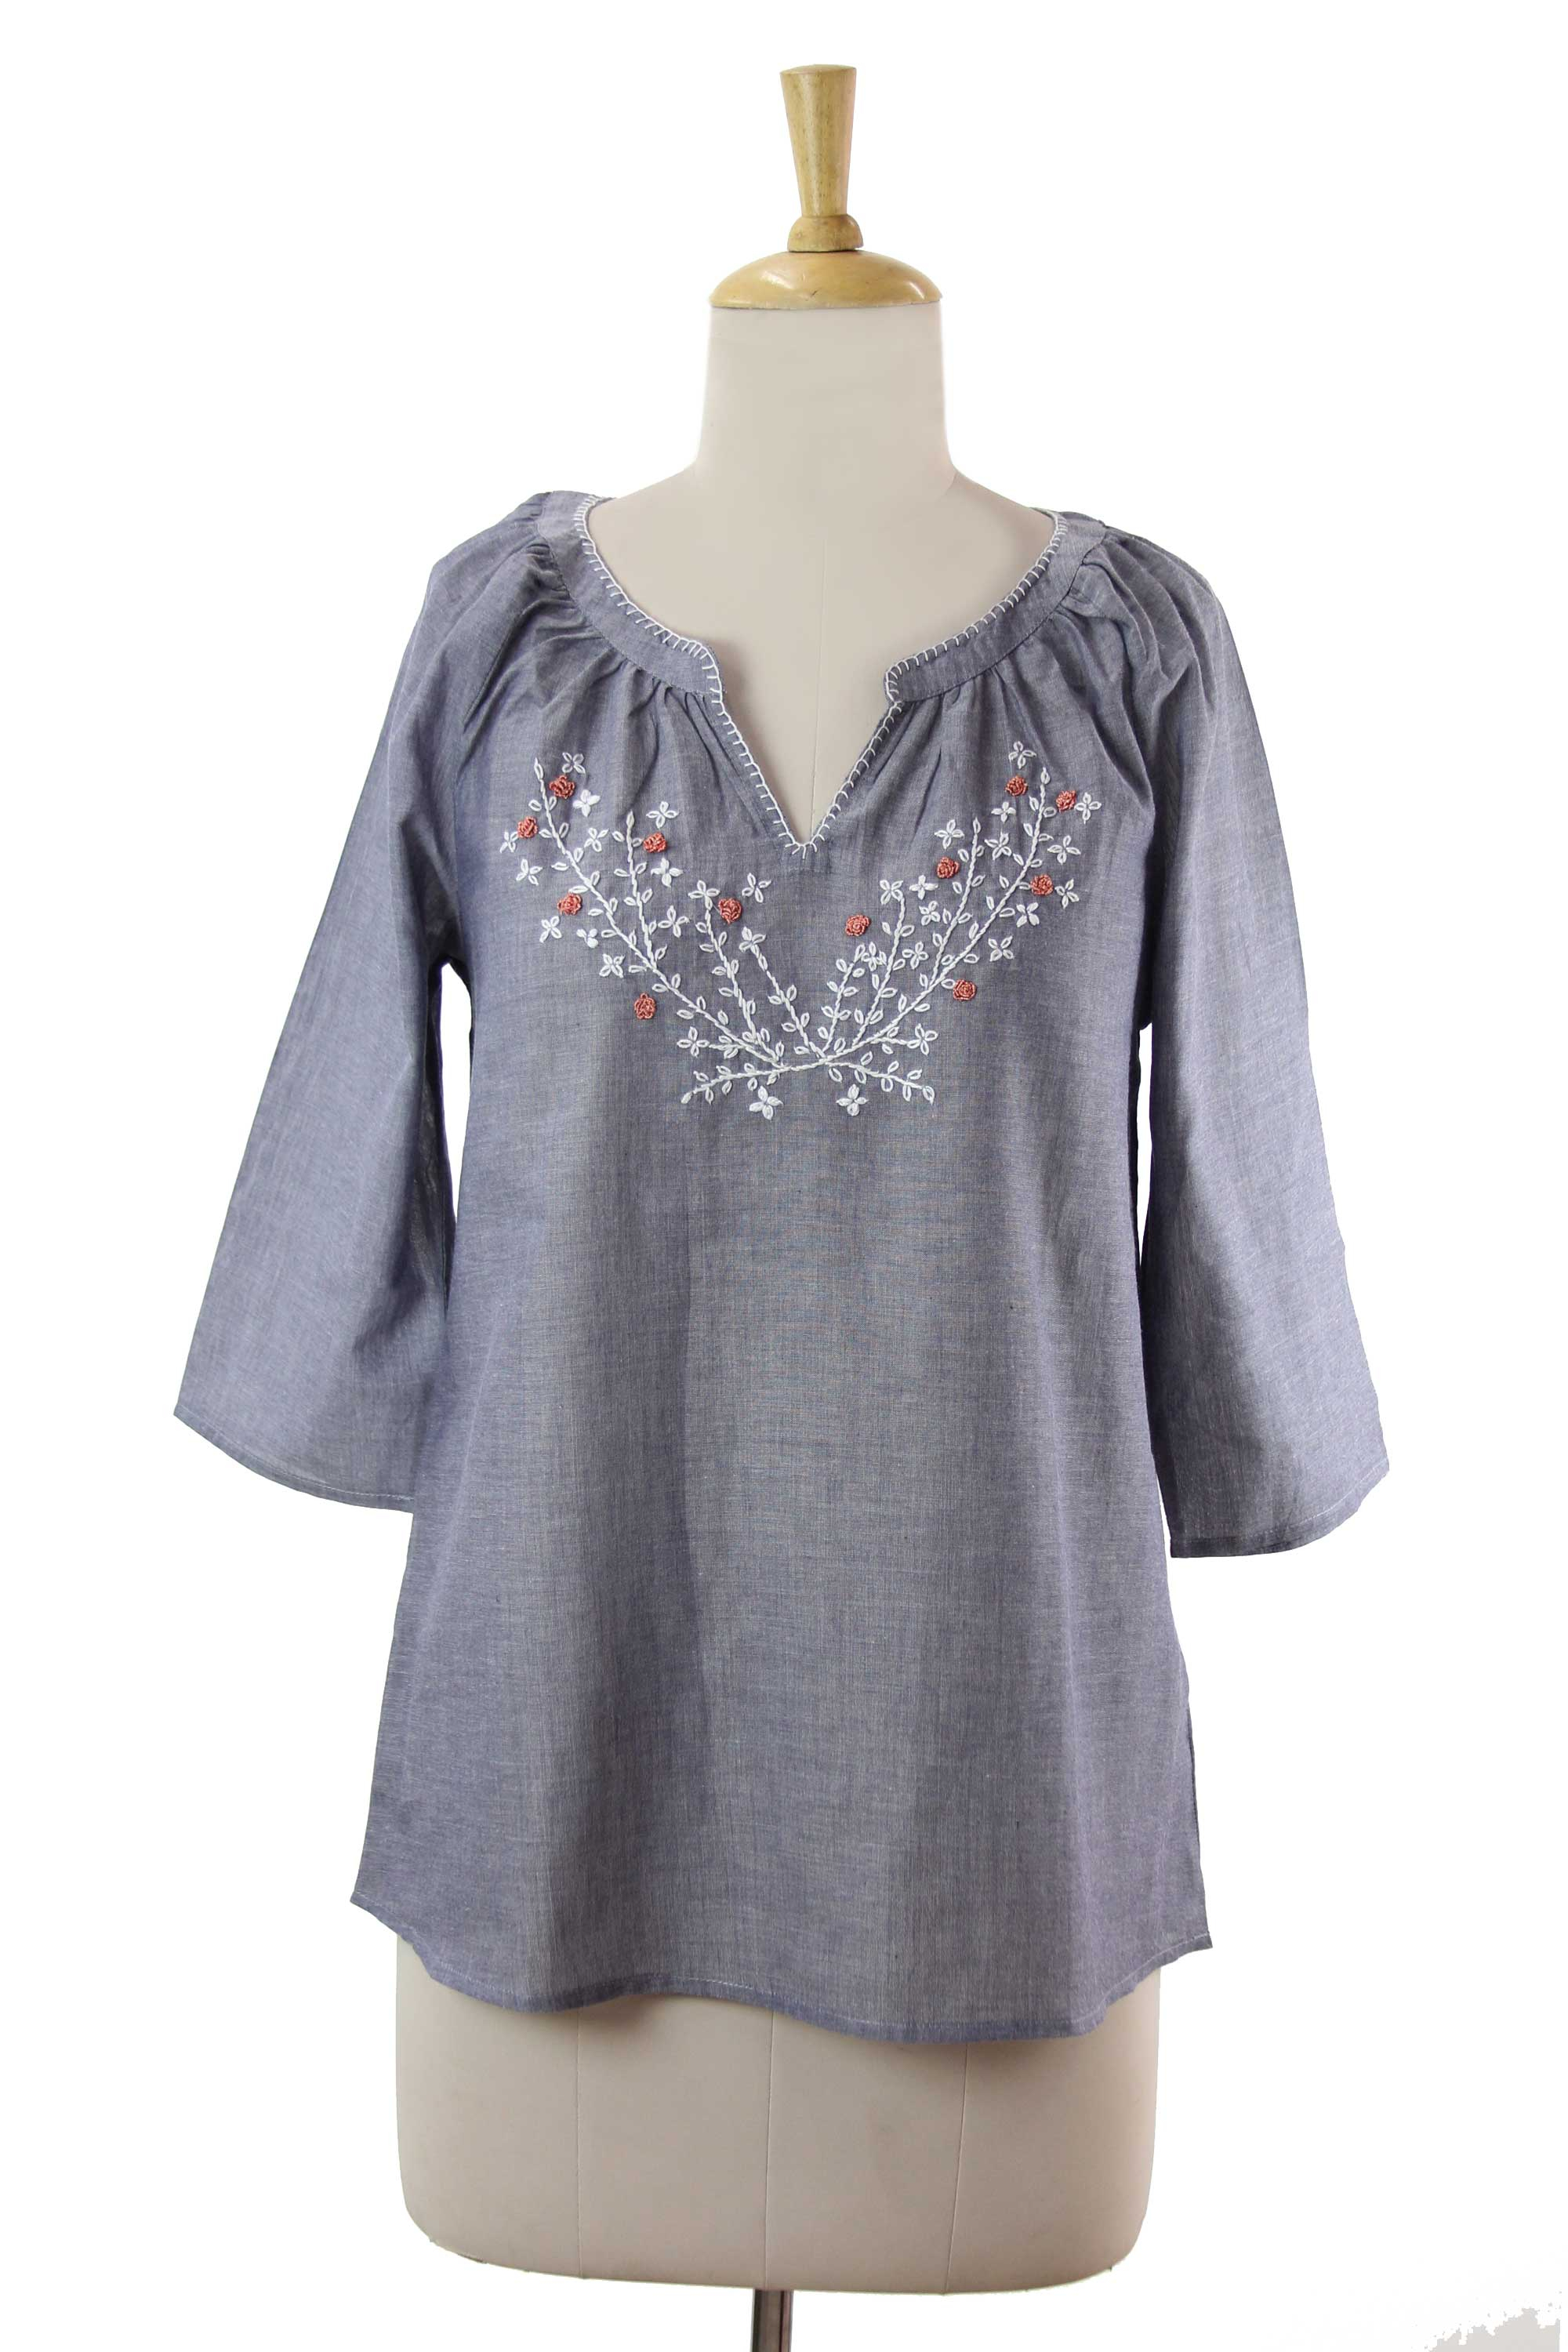 India Blue Cotton Chambray Blouse with Hand Embroidery - Charming ...